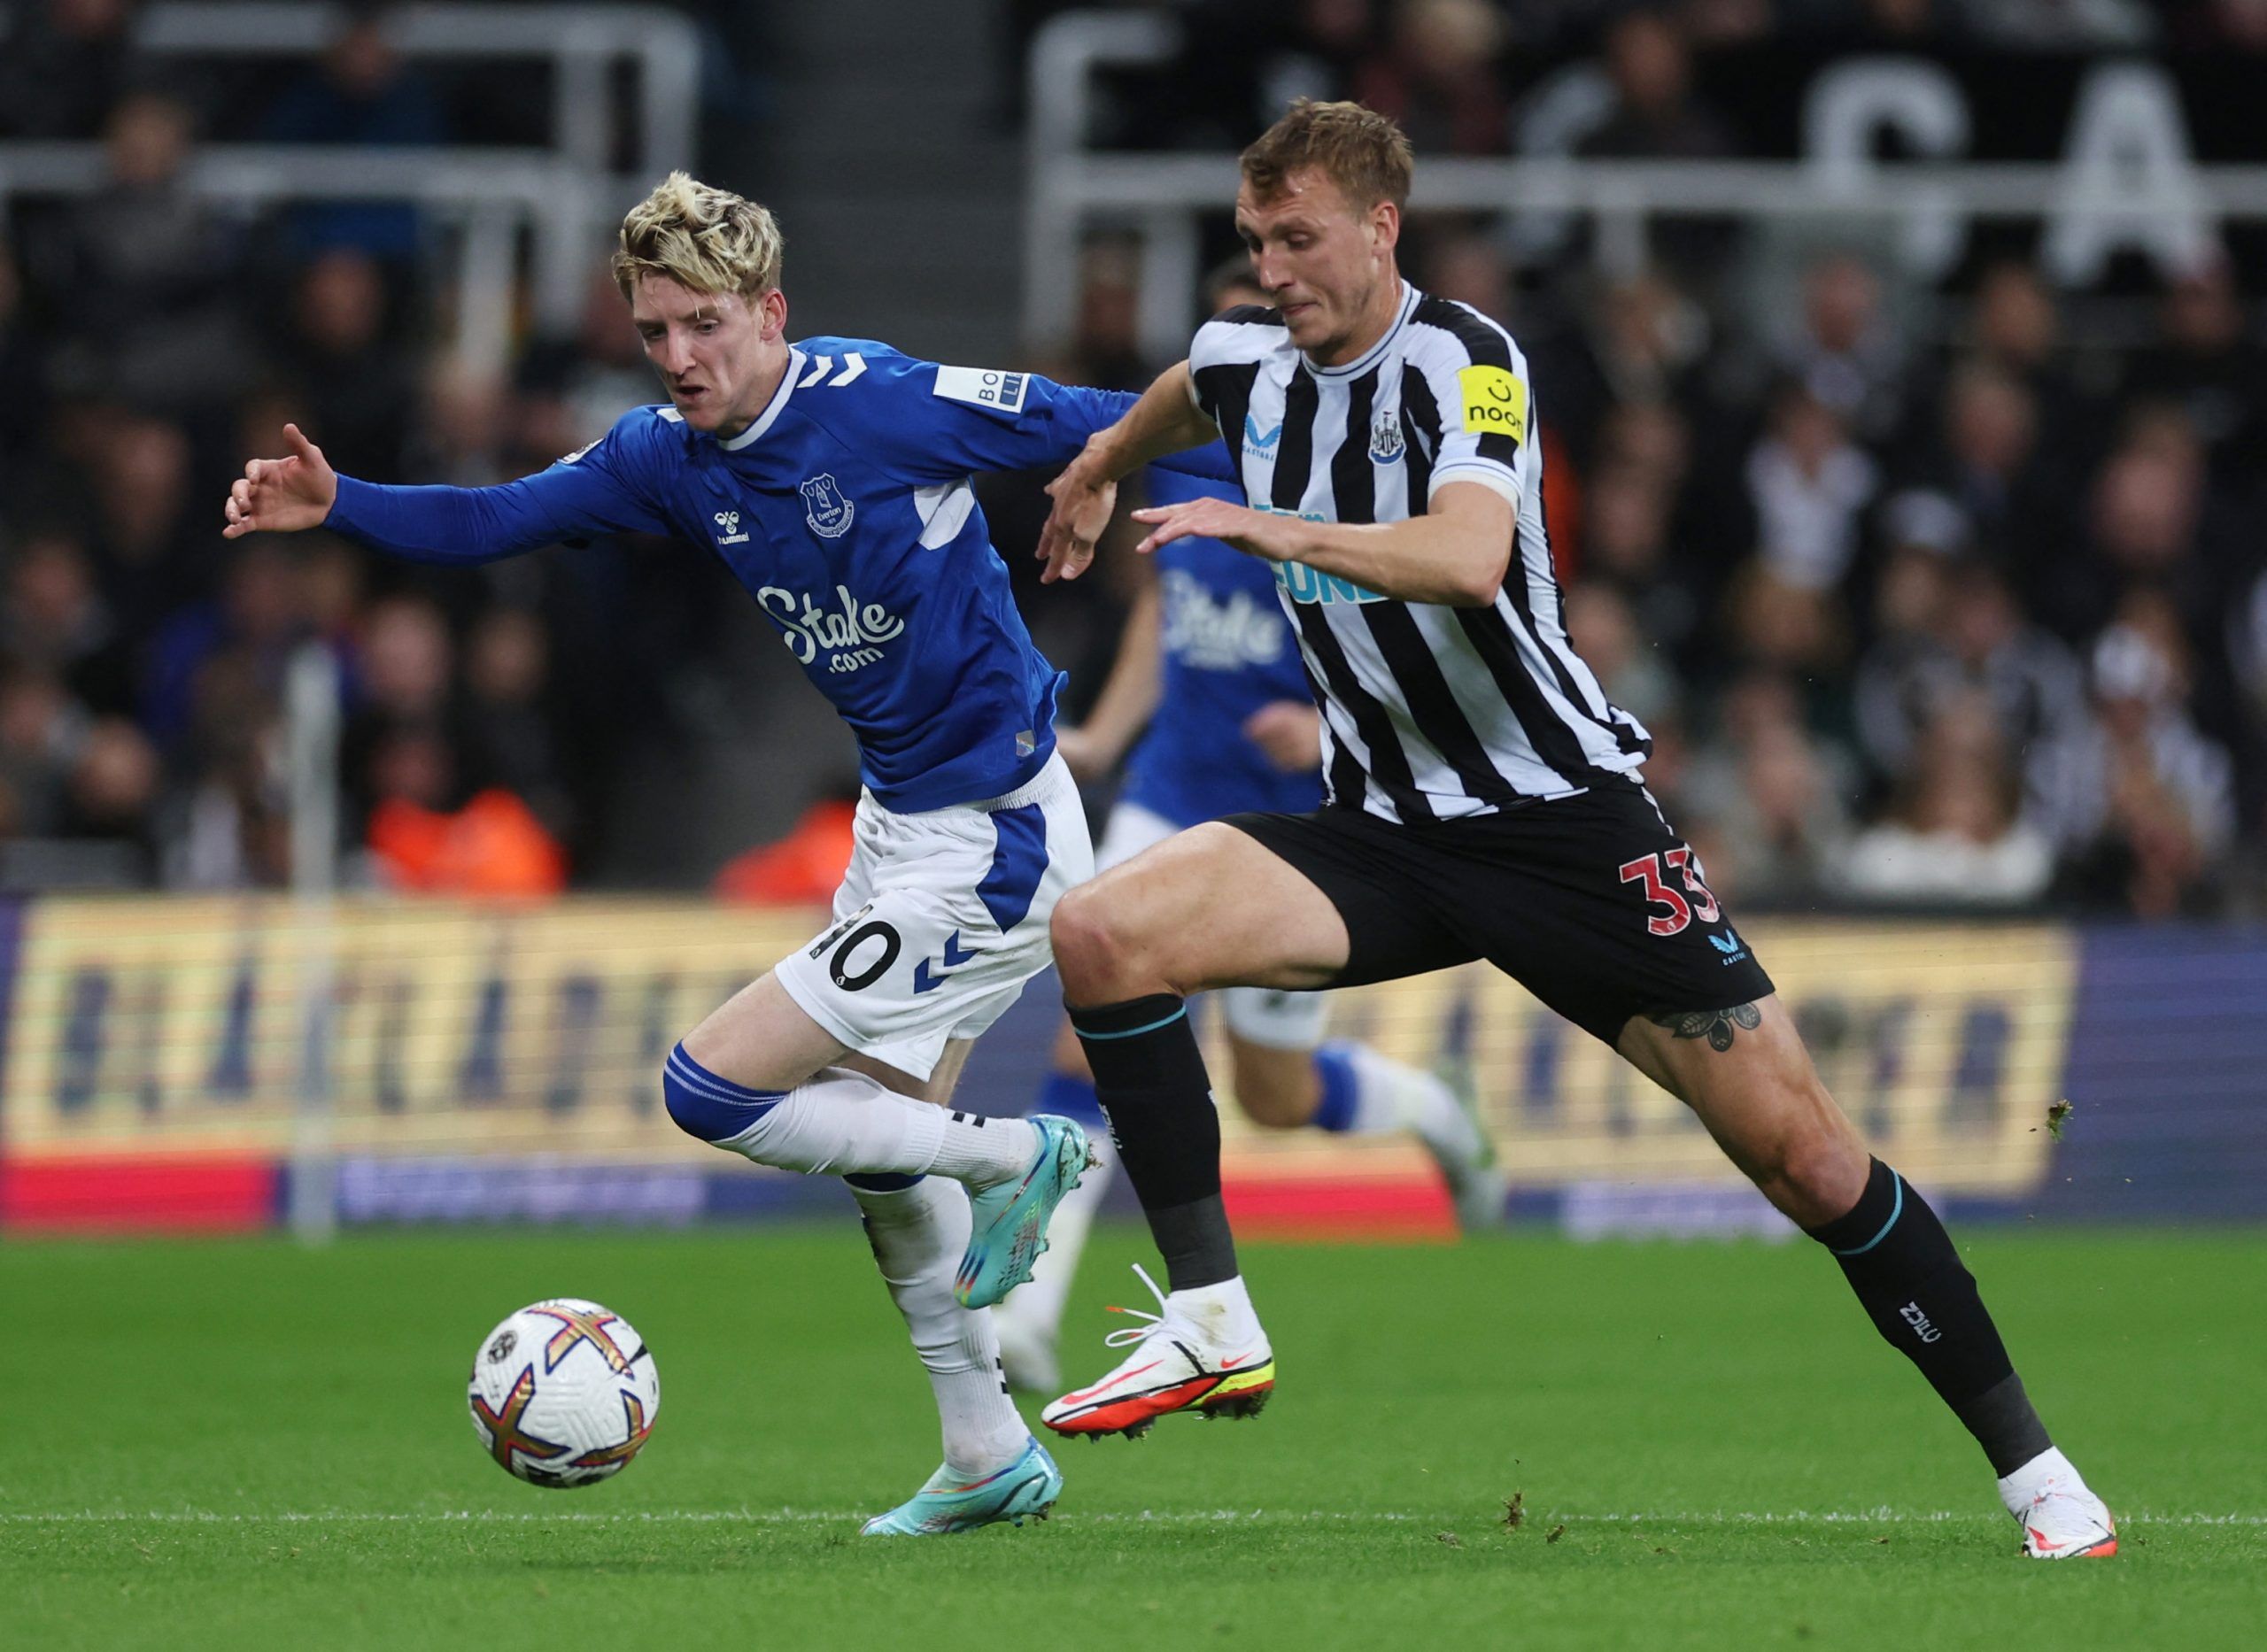 Soccer Football - Premier League - Newcastle United v Everton - St James' Park, Newcastle, Britain - October 19, 2022 Everton's Anthony Gordon in action with Newcastle United's Dan Burn Action Images via Reuters/Lee Smith EDITORIAL USE ONLY. No use with unauthorized audio, video, data, fixture lists, club/league logos or 'live' services. Online in-match use limited to 75 images, no video emulation. No use in betting, games or single club /league/player publications.  Please contact your account 